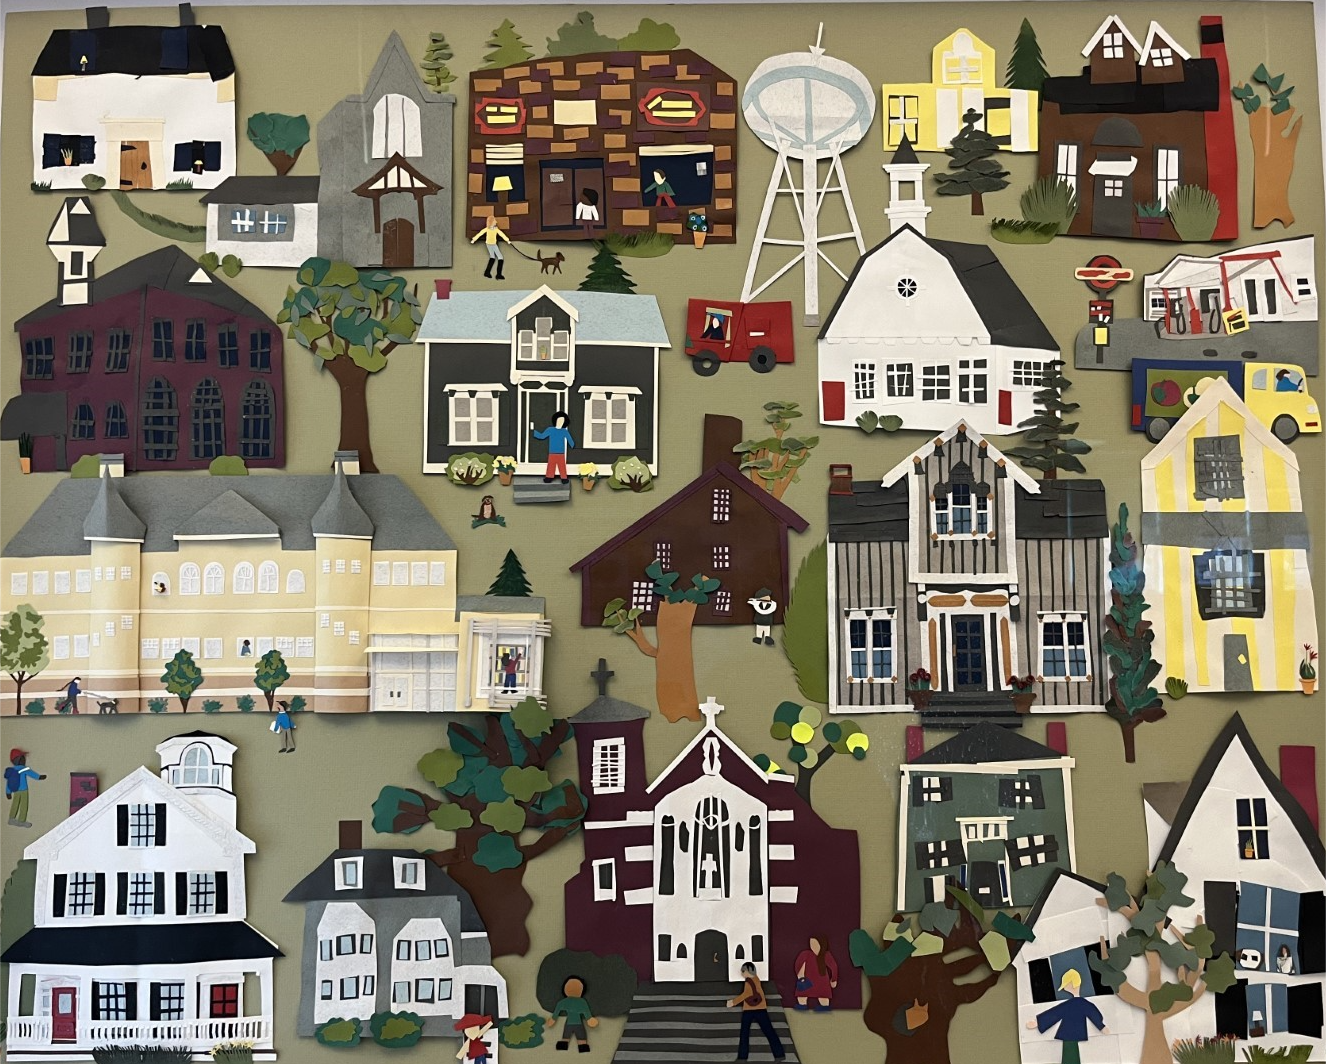 An illustration of a community of homes, buildings, and people.